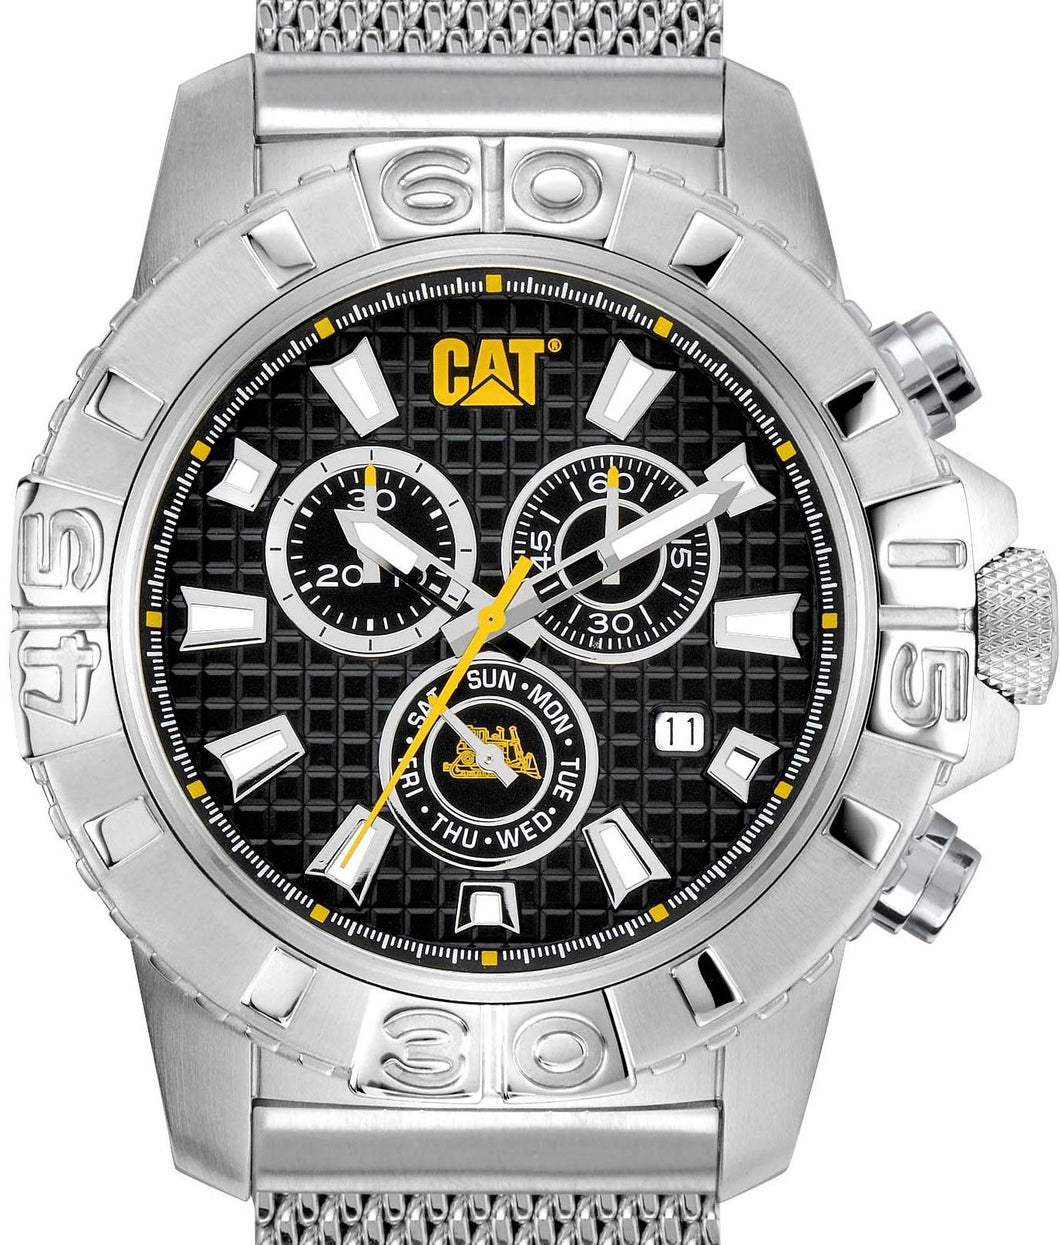 Authentic CAT Alaska Stainless Steel Chronograph Mens Watch